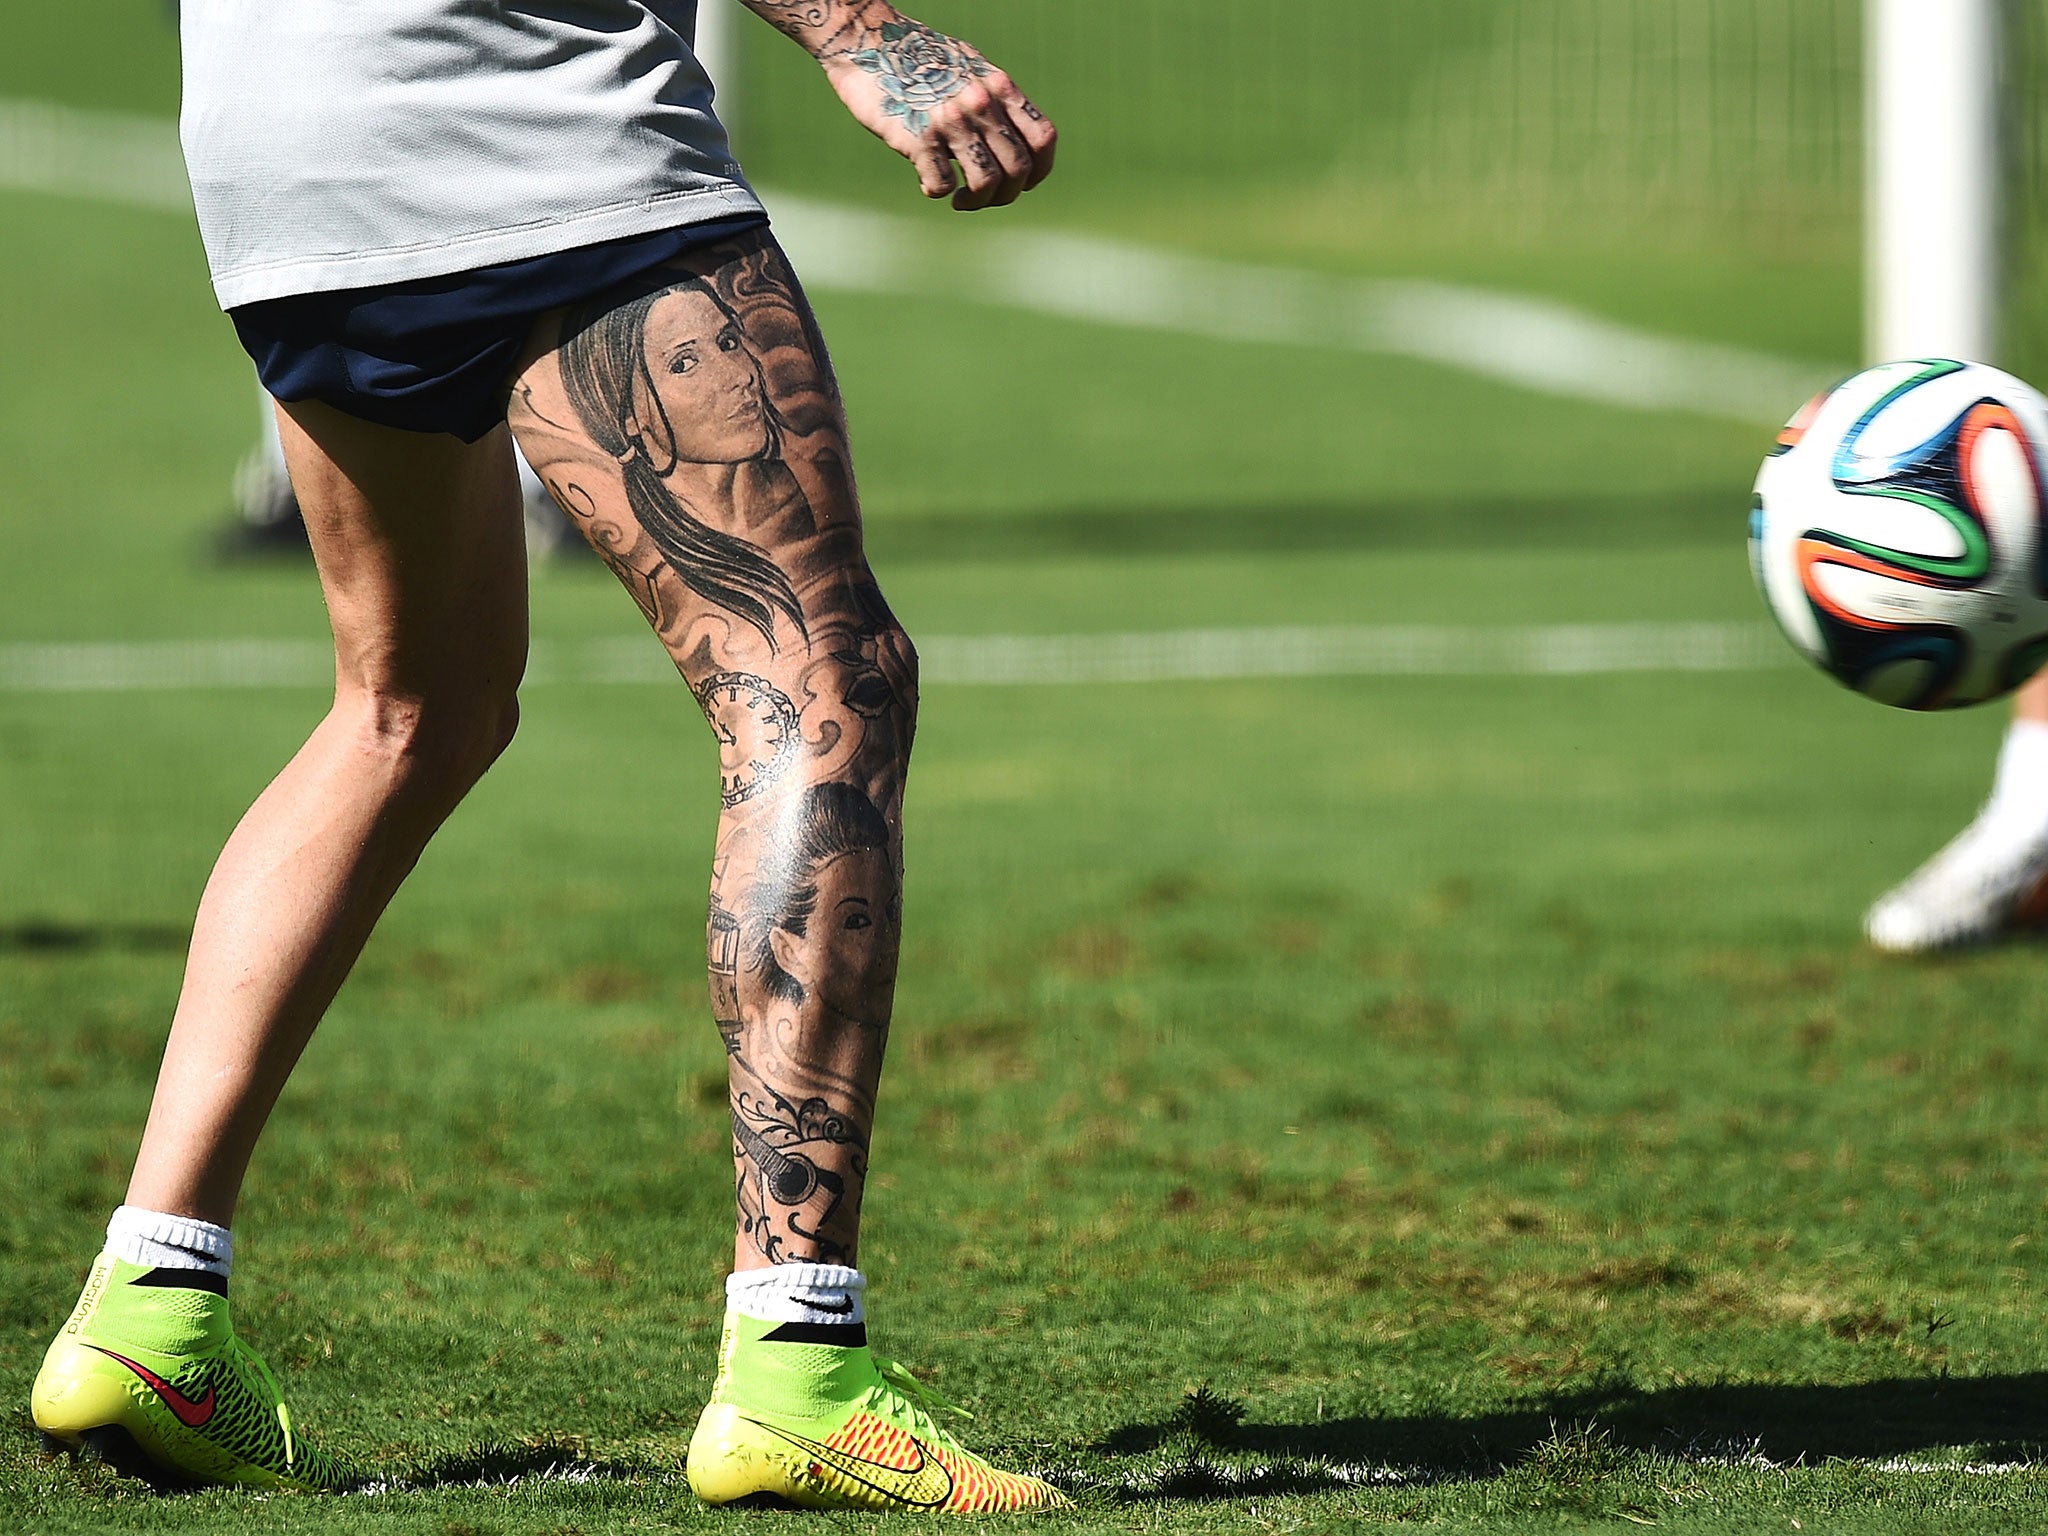 Pulisic tiger tattoo was inspired by Tiger Woods